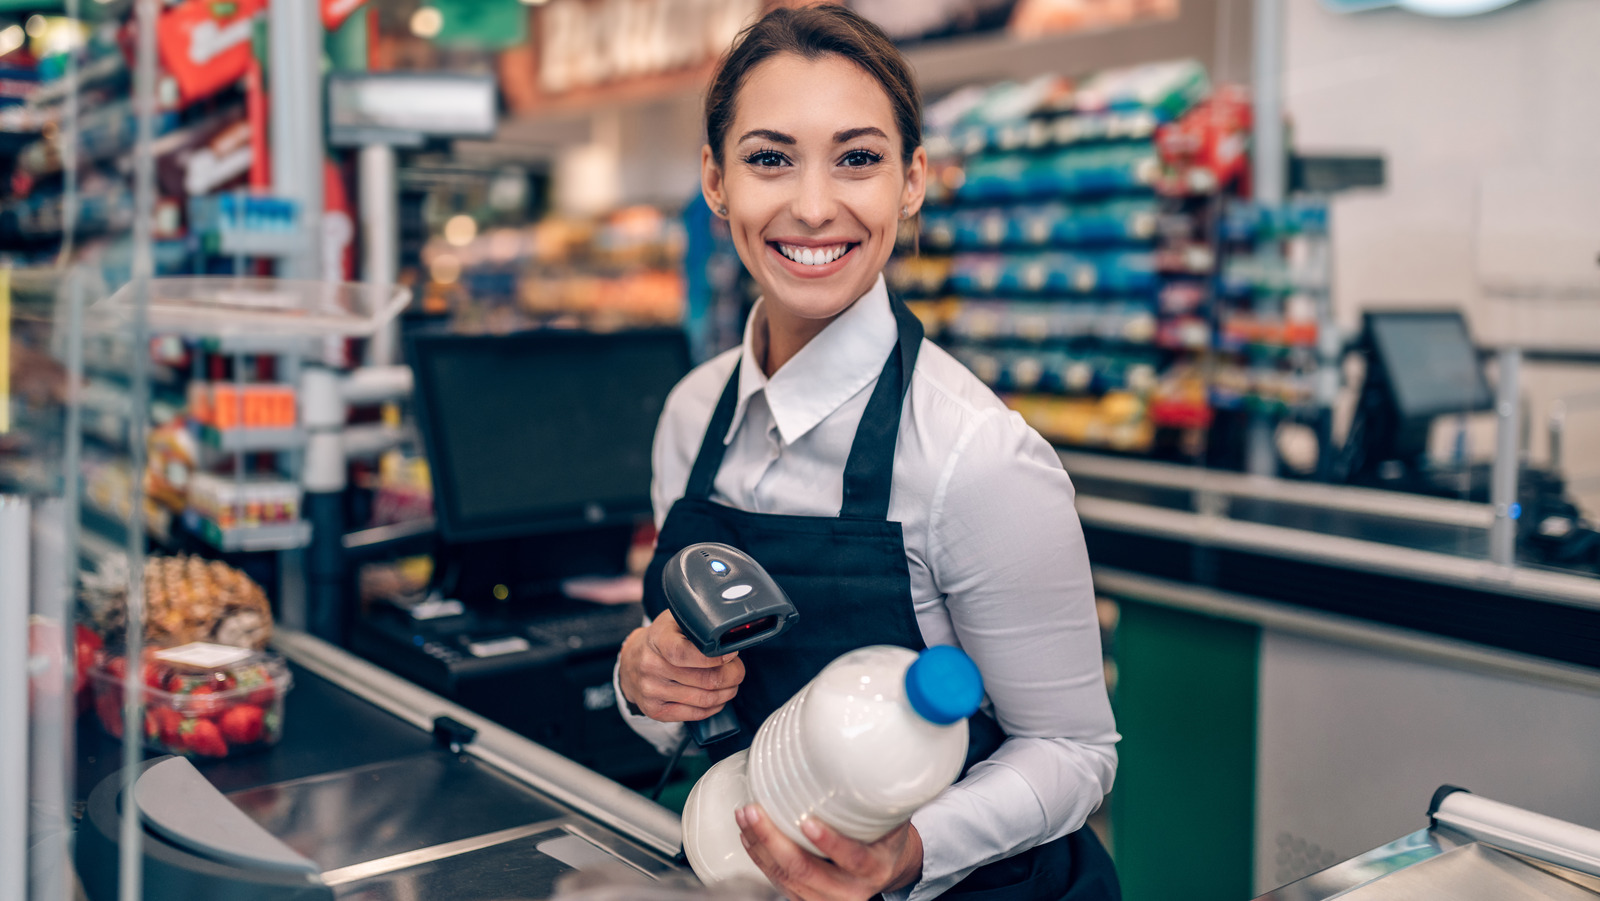 https://www.thedailymeal.com/img/gallery/can-you-tip-grocery-store-workers/l-intro-1681327495.jpg